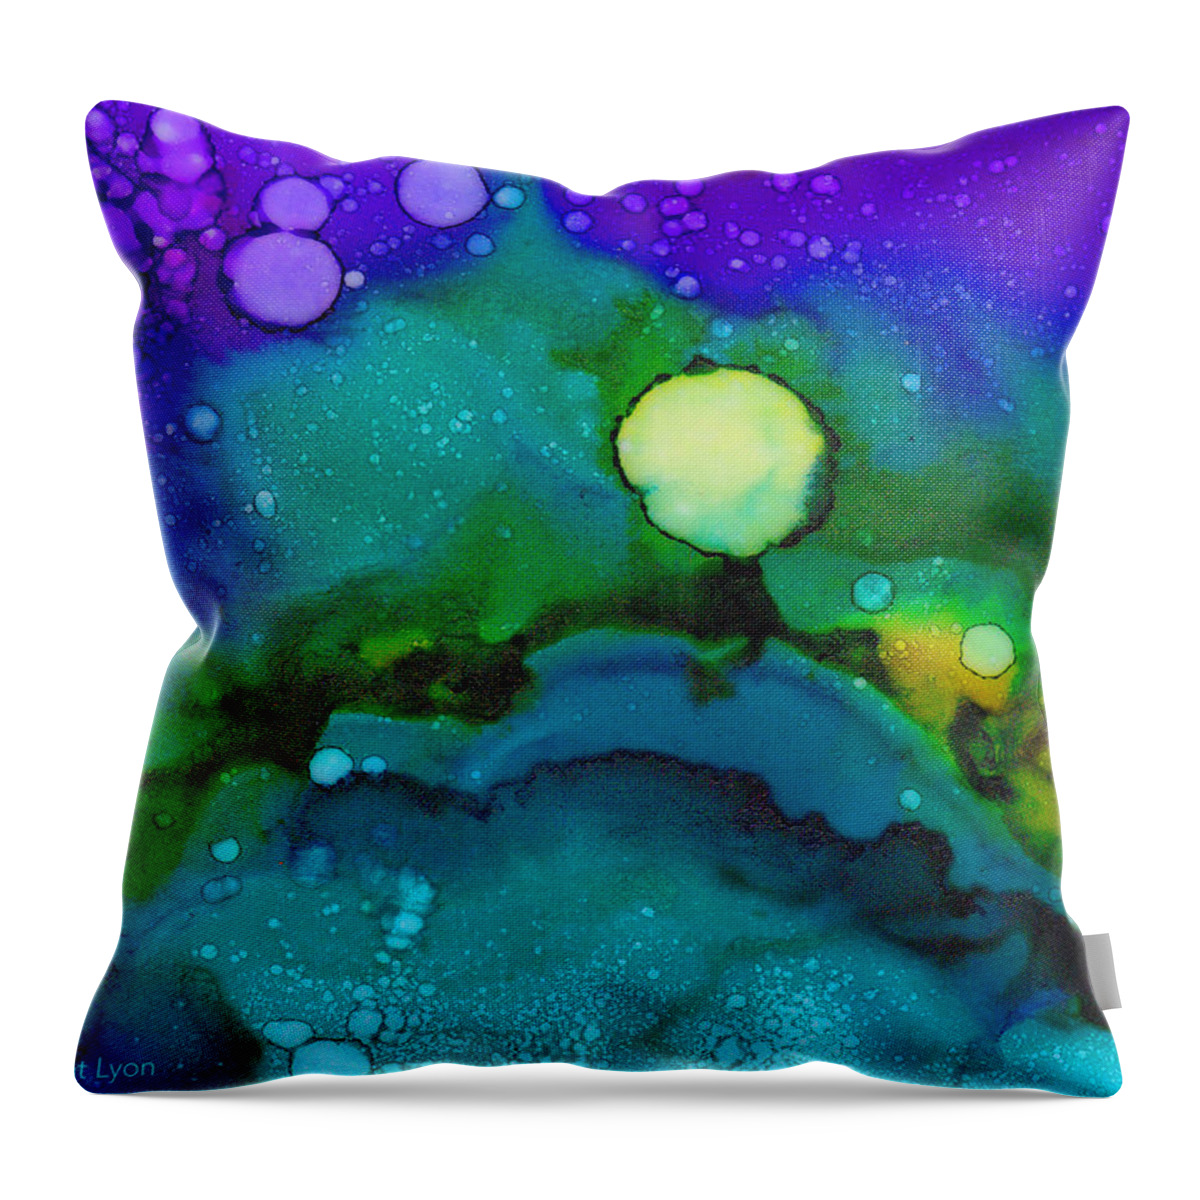 Tropical Throw Pillow featuring the painting Tropical Moon by Angela Treat Lyon